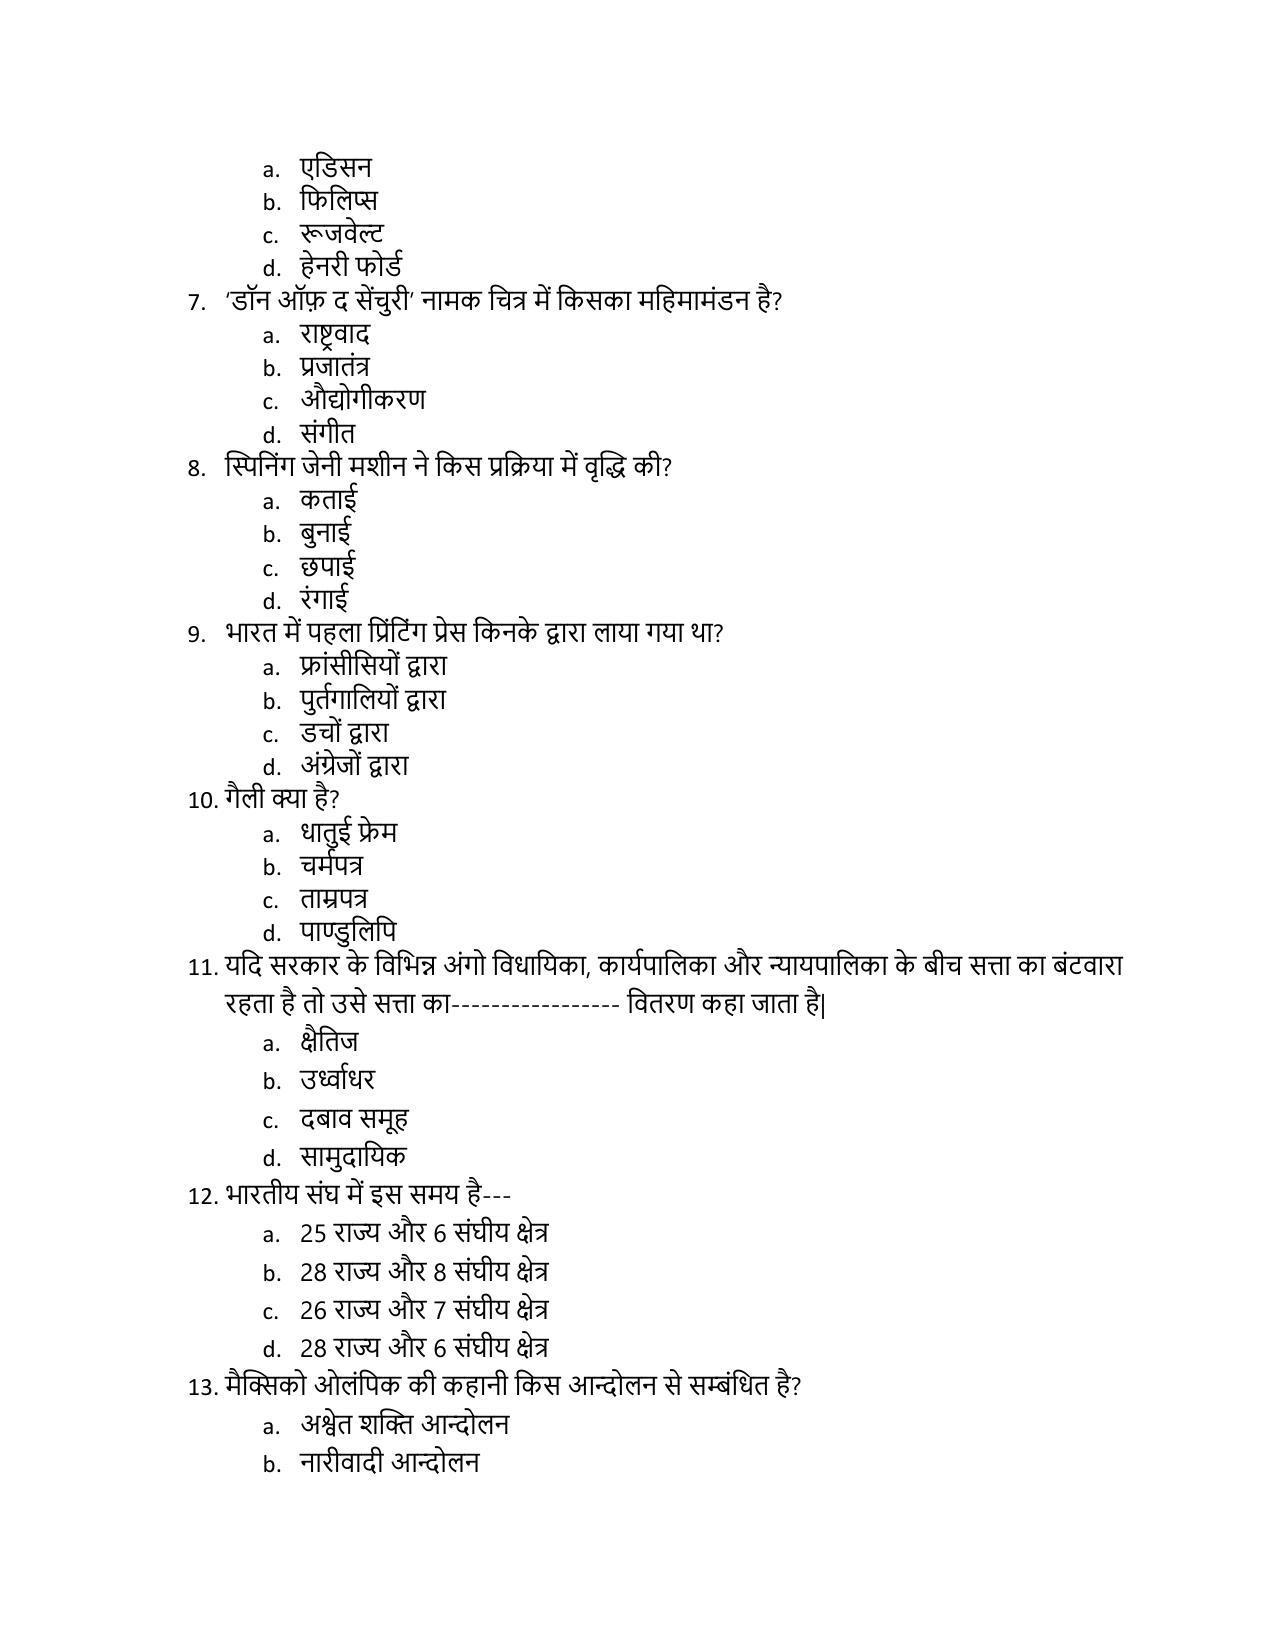 JAC Board Class 10th Model Papers - Page 29